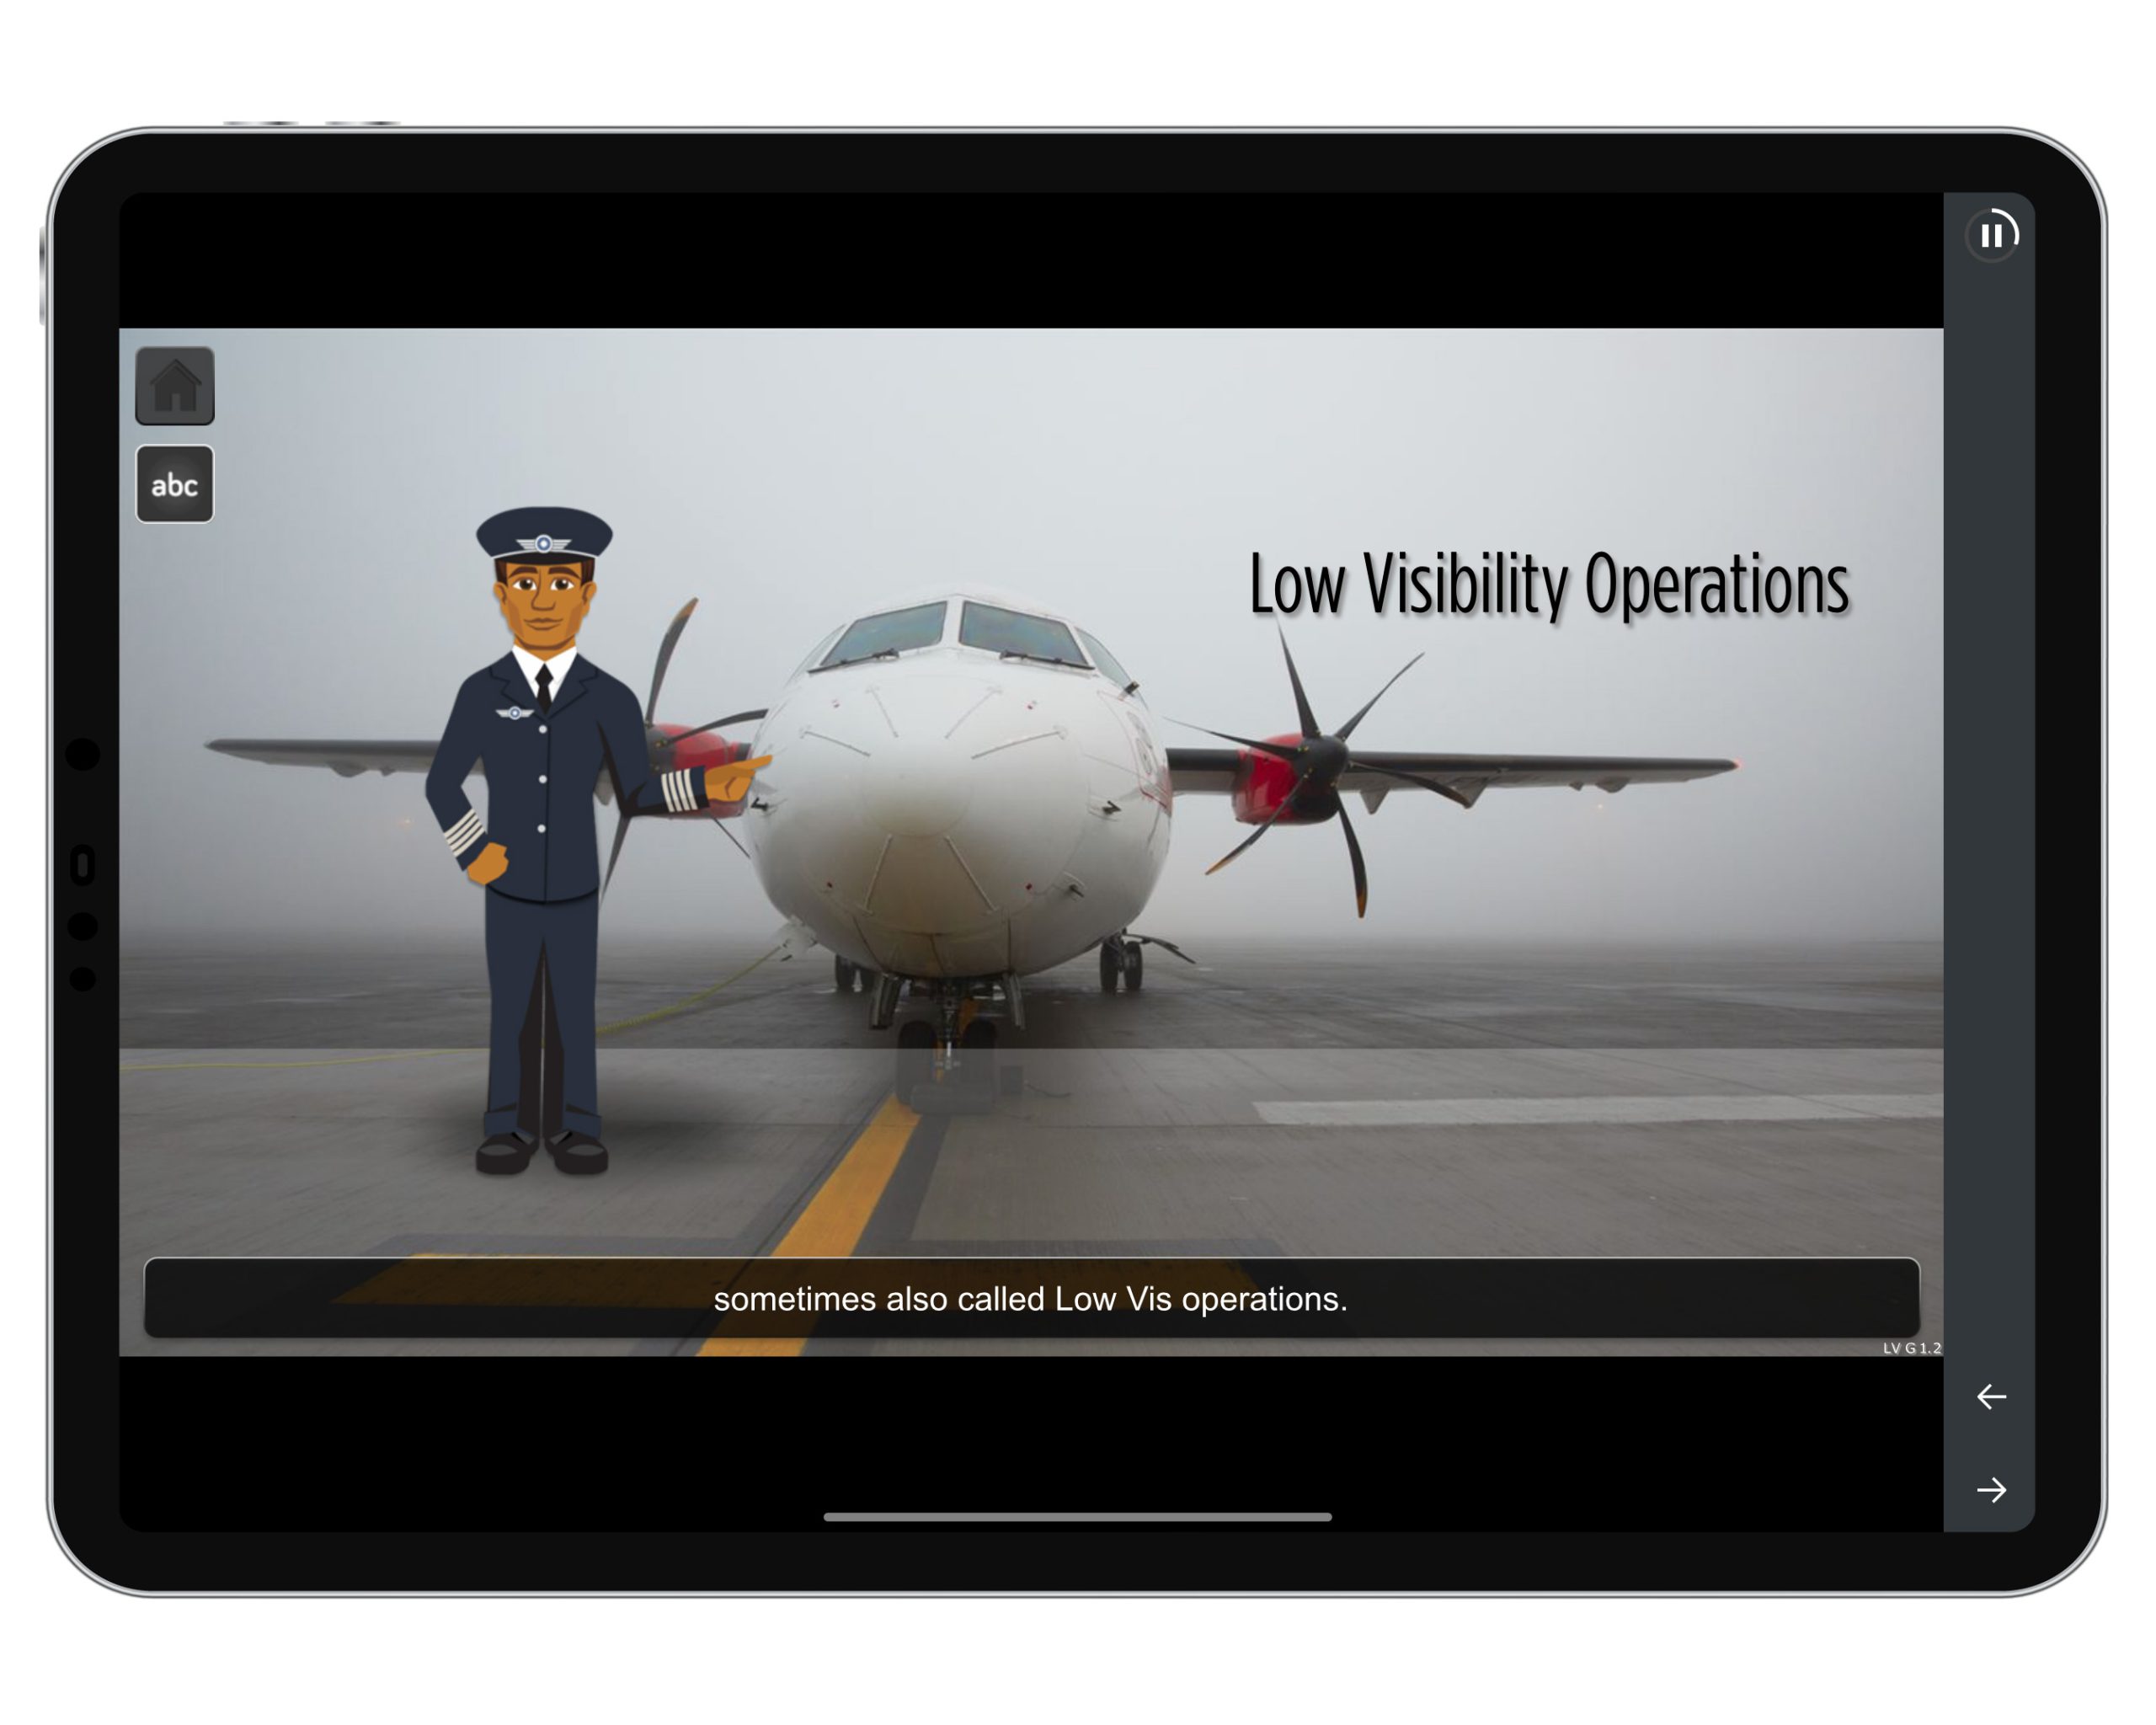 Screenshot showing Low Visibility Operations for the airline flight crew and flight instructors.